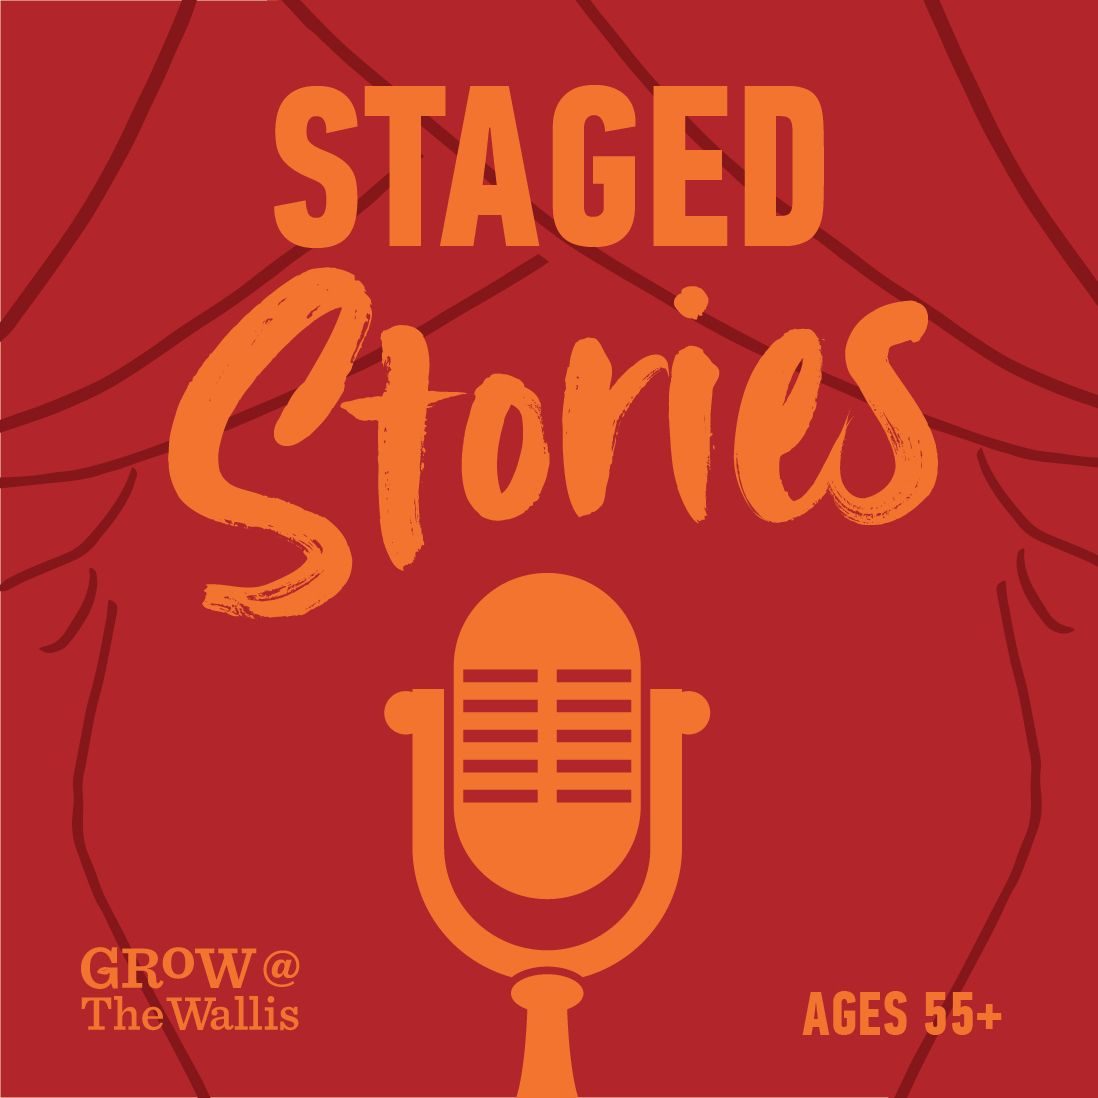 Staged Stories